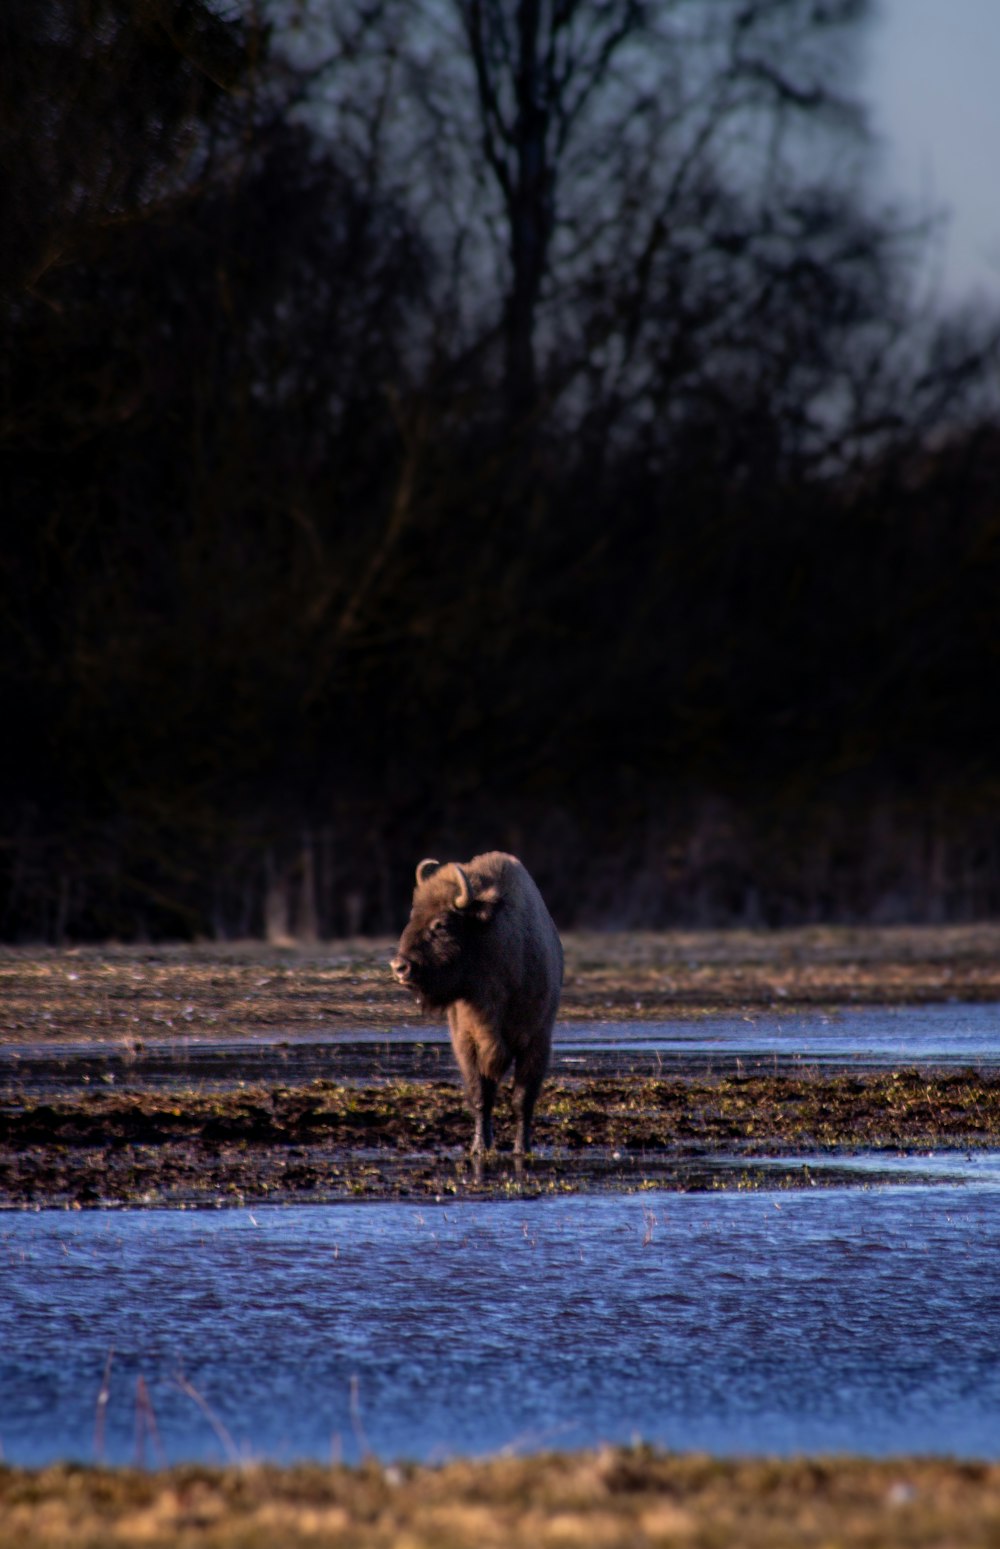 a bison is standing in a shallow body of water